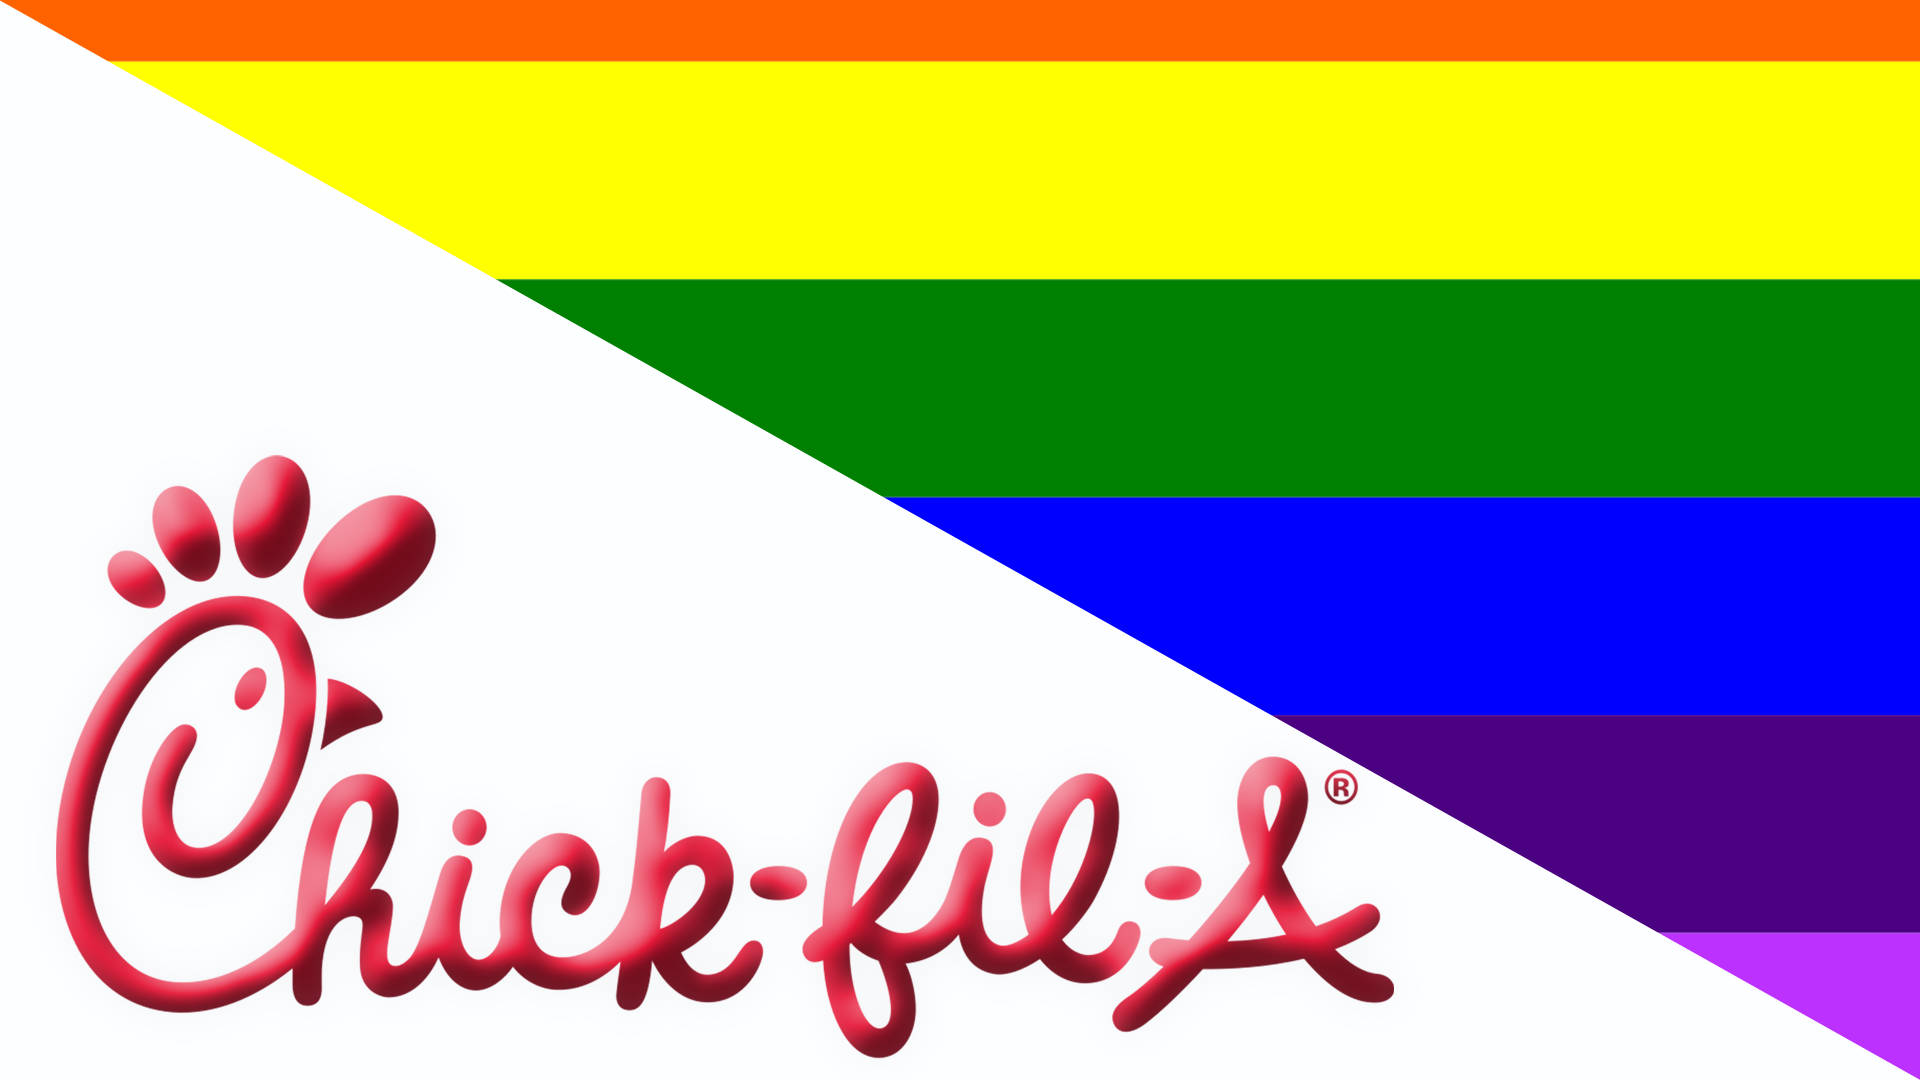 Chick Fil A Rainbow Poster Background